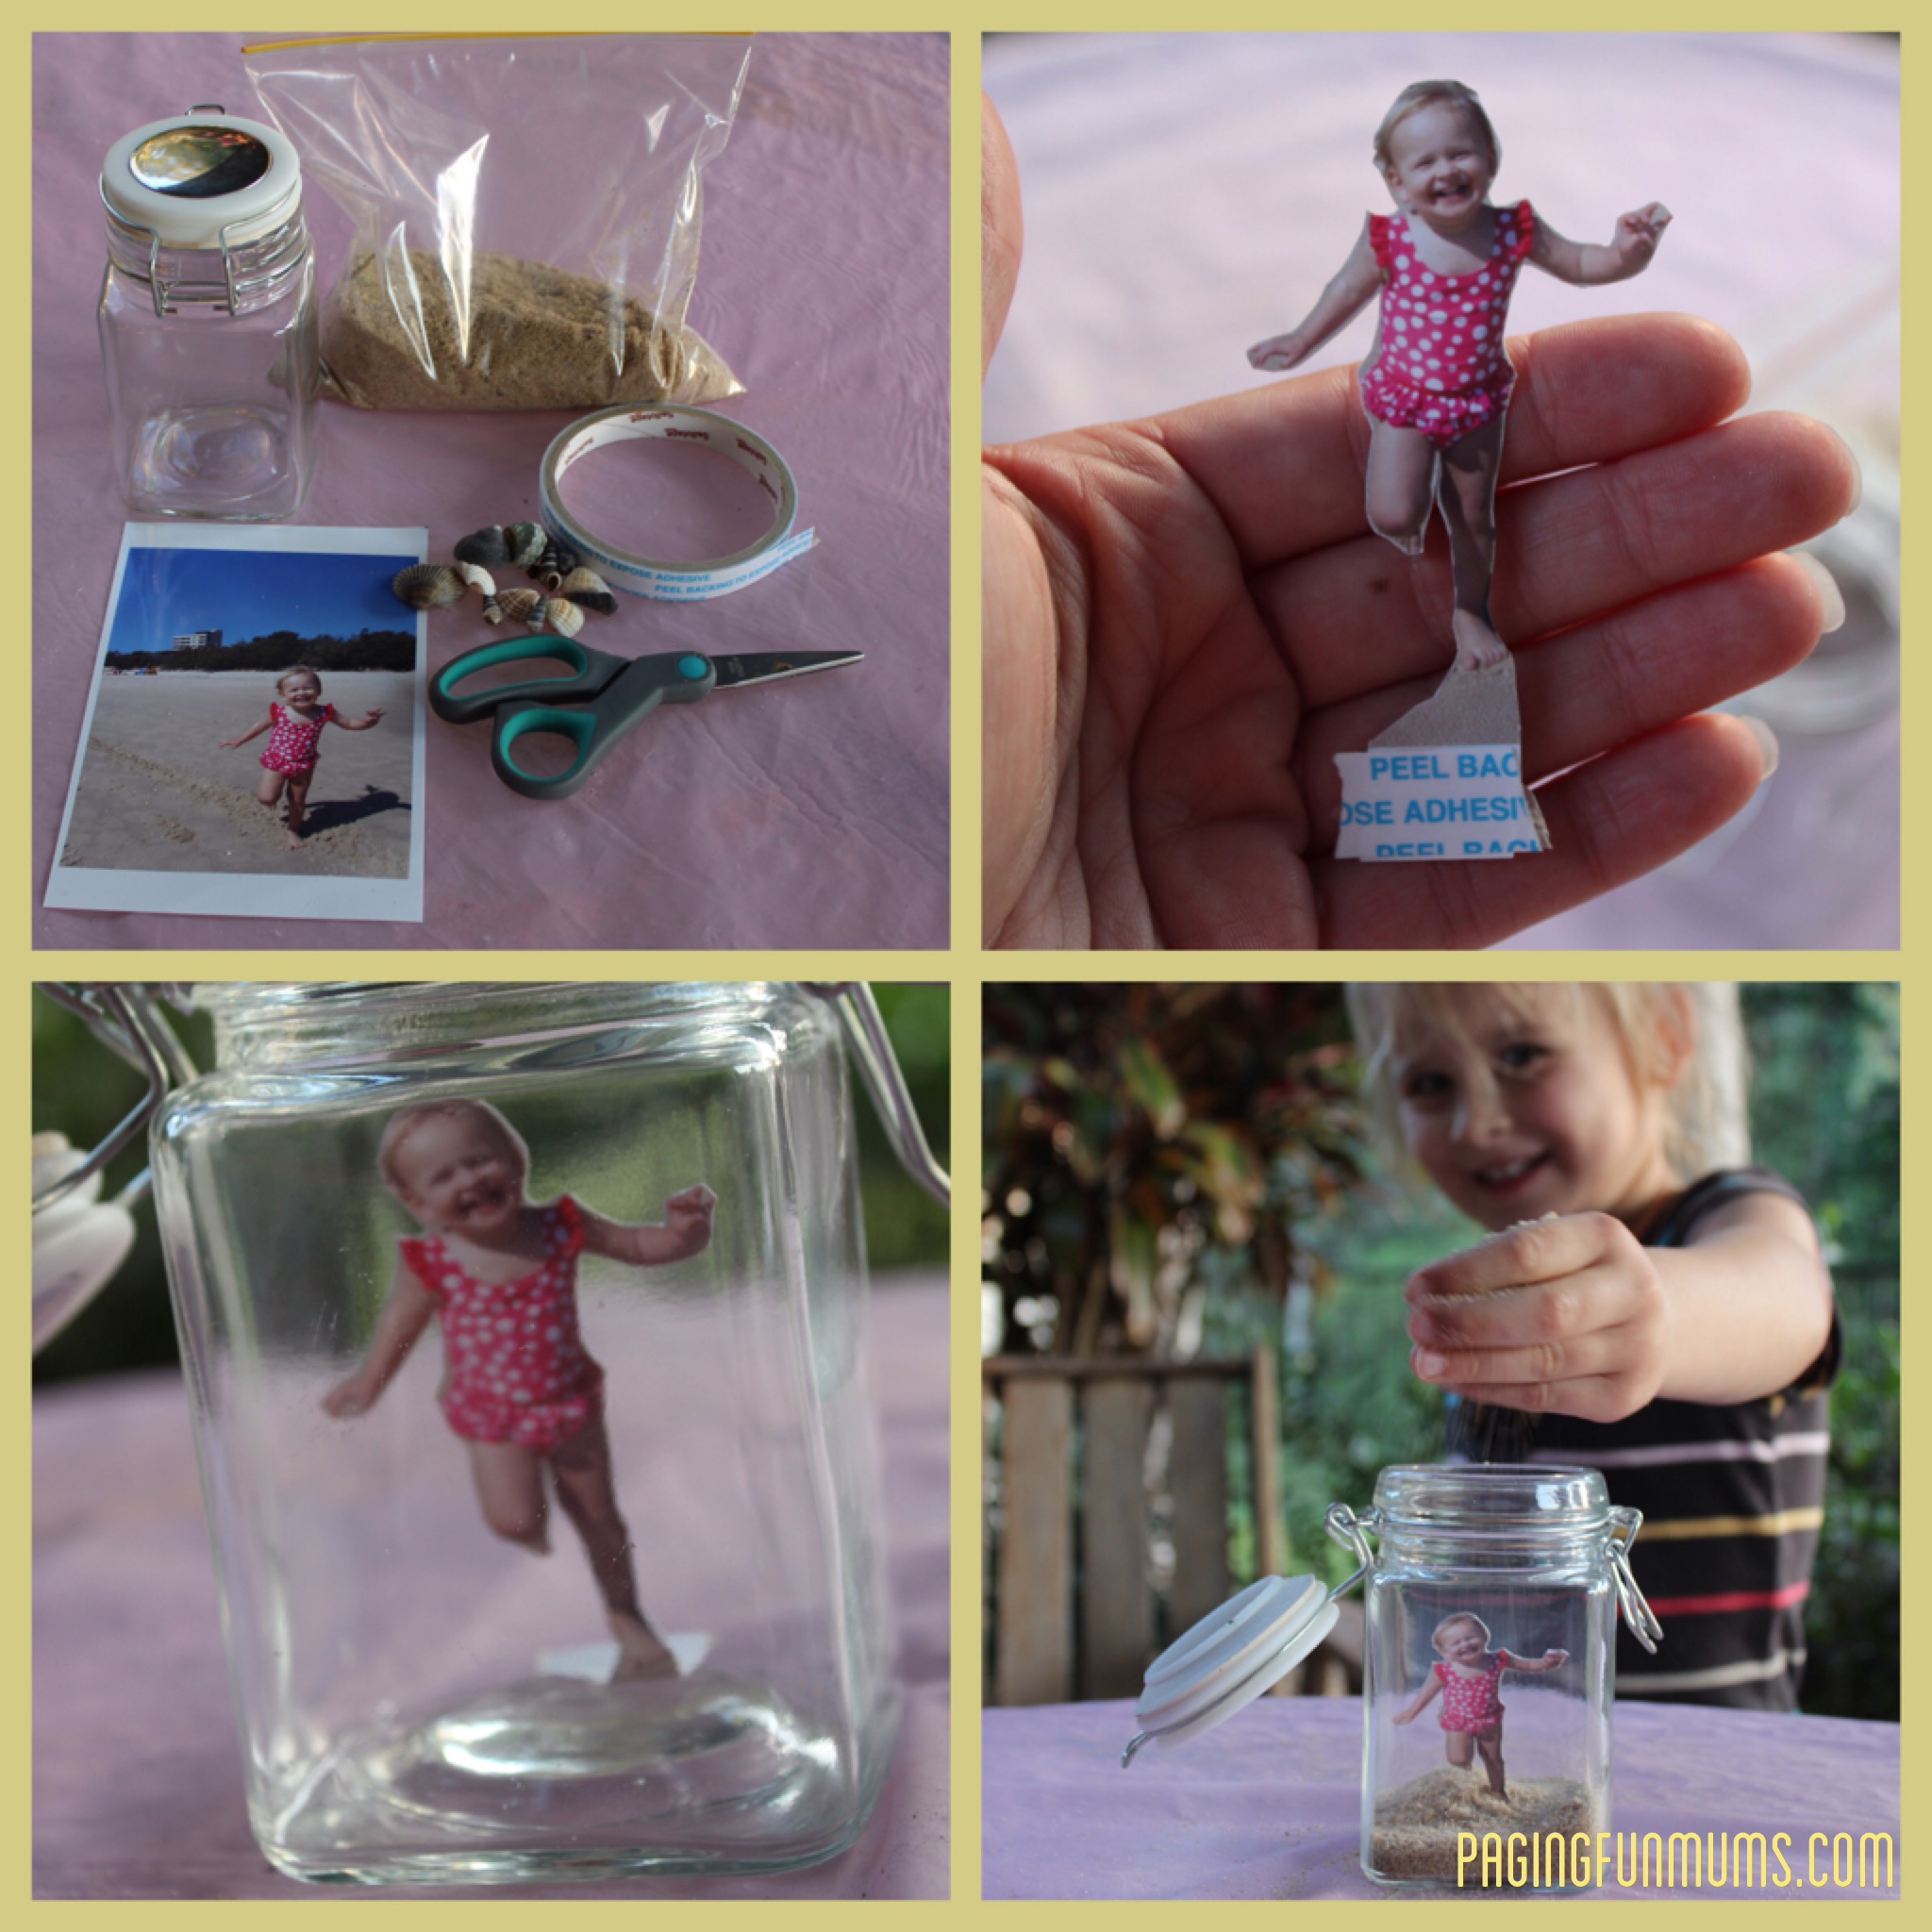 Beach Memory Jar - a special keepsake filled with happy memories and little treasures.